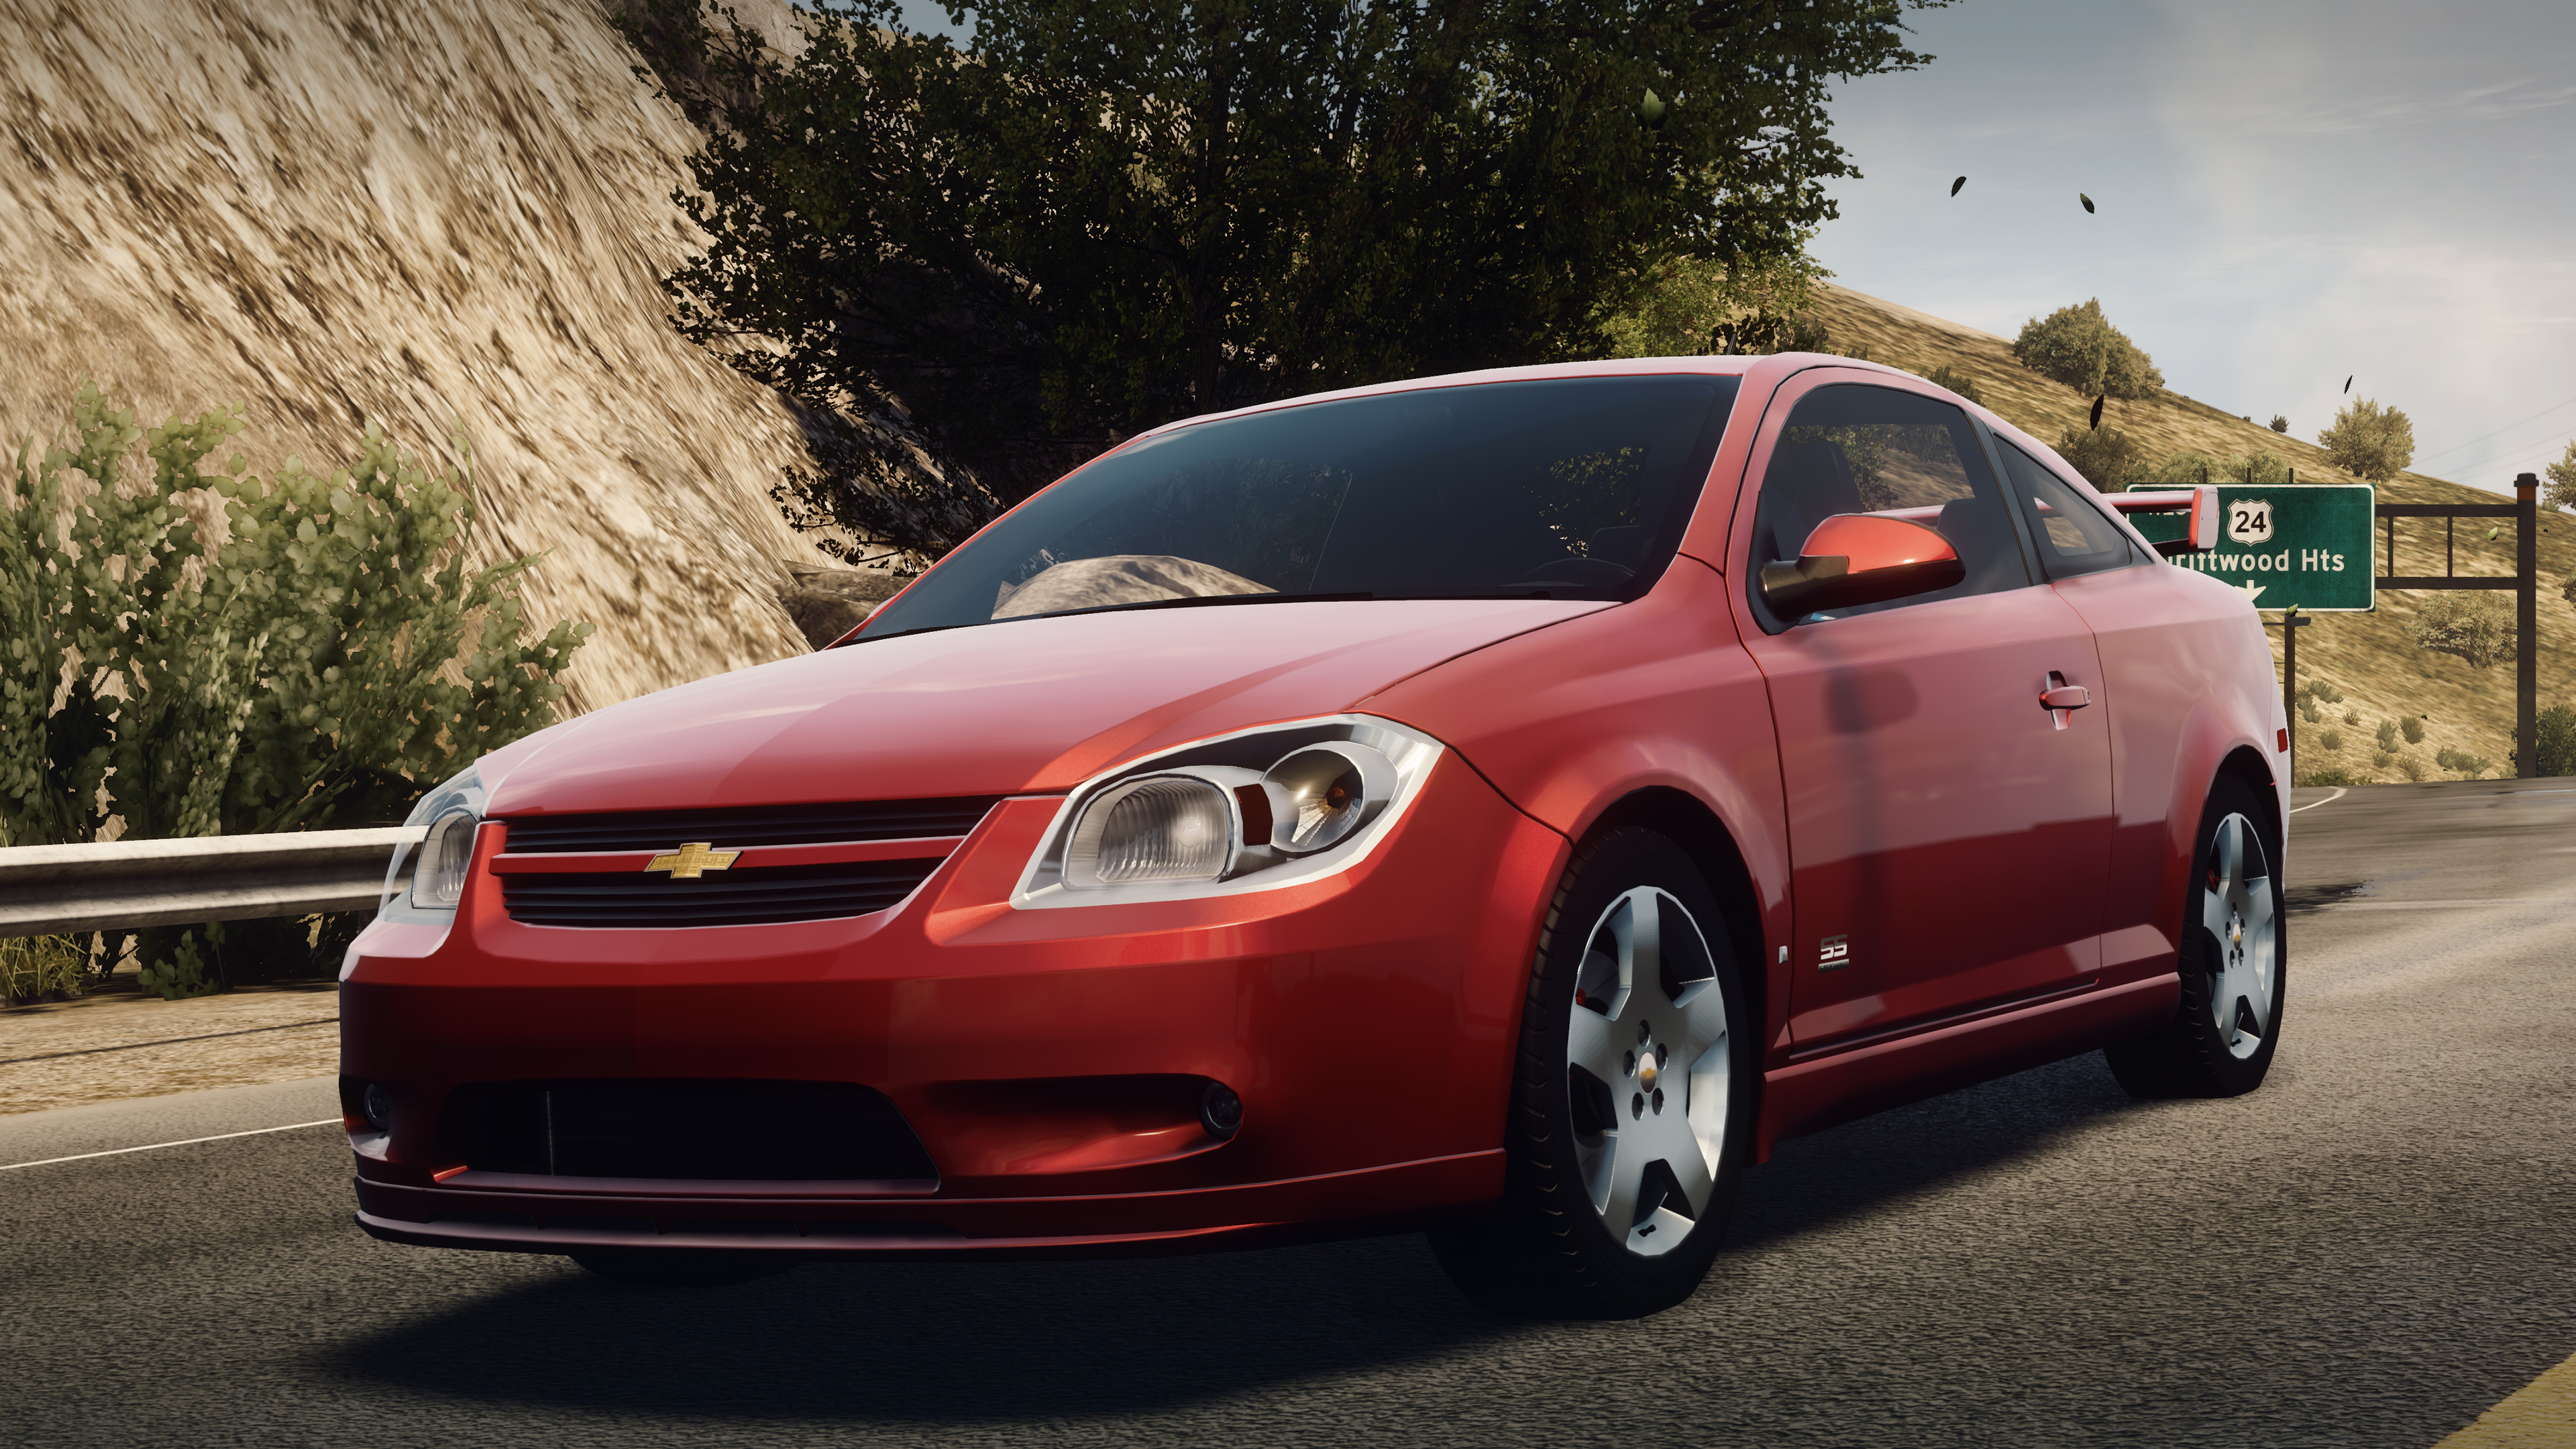 Chevrolet Cobalt SS (Stage 3) | Need for Speed Wiki | Fandom